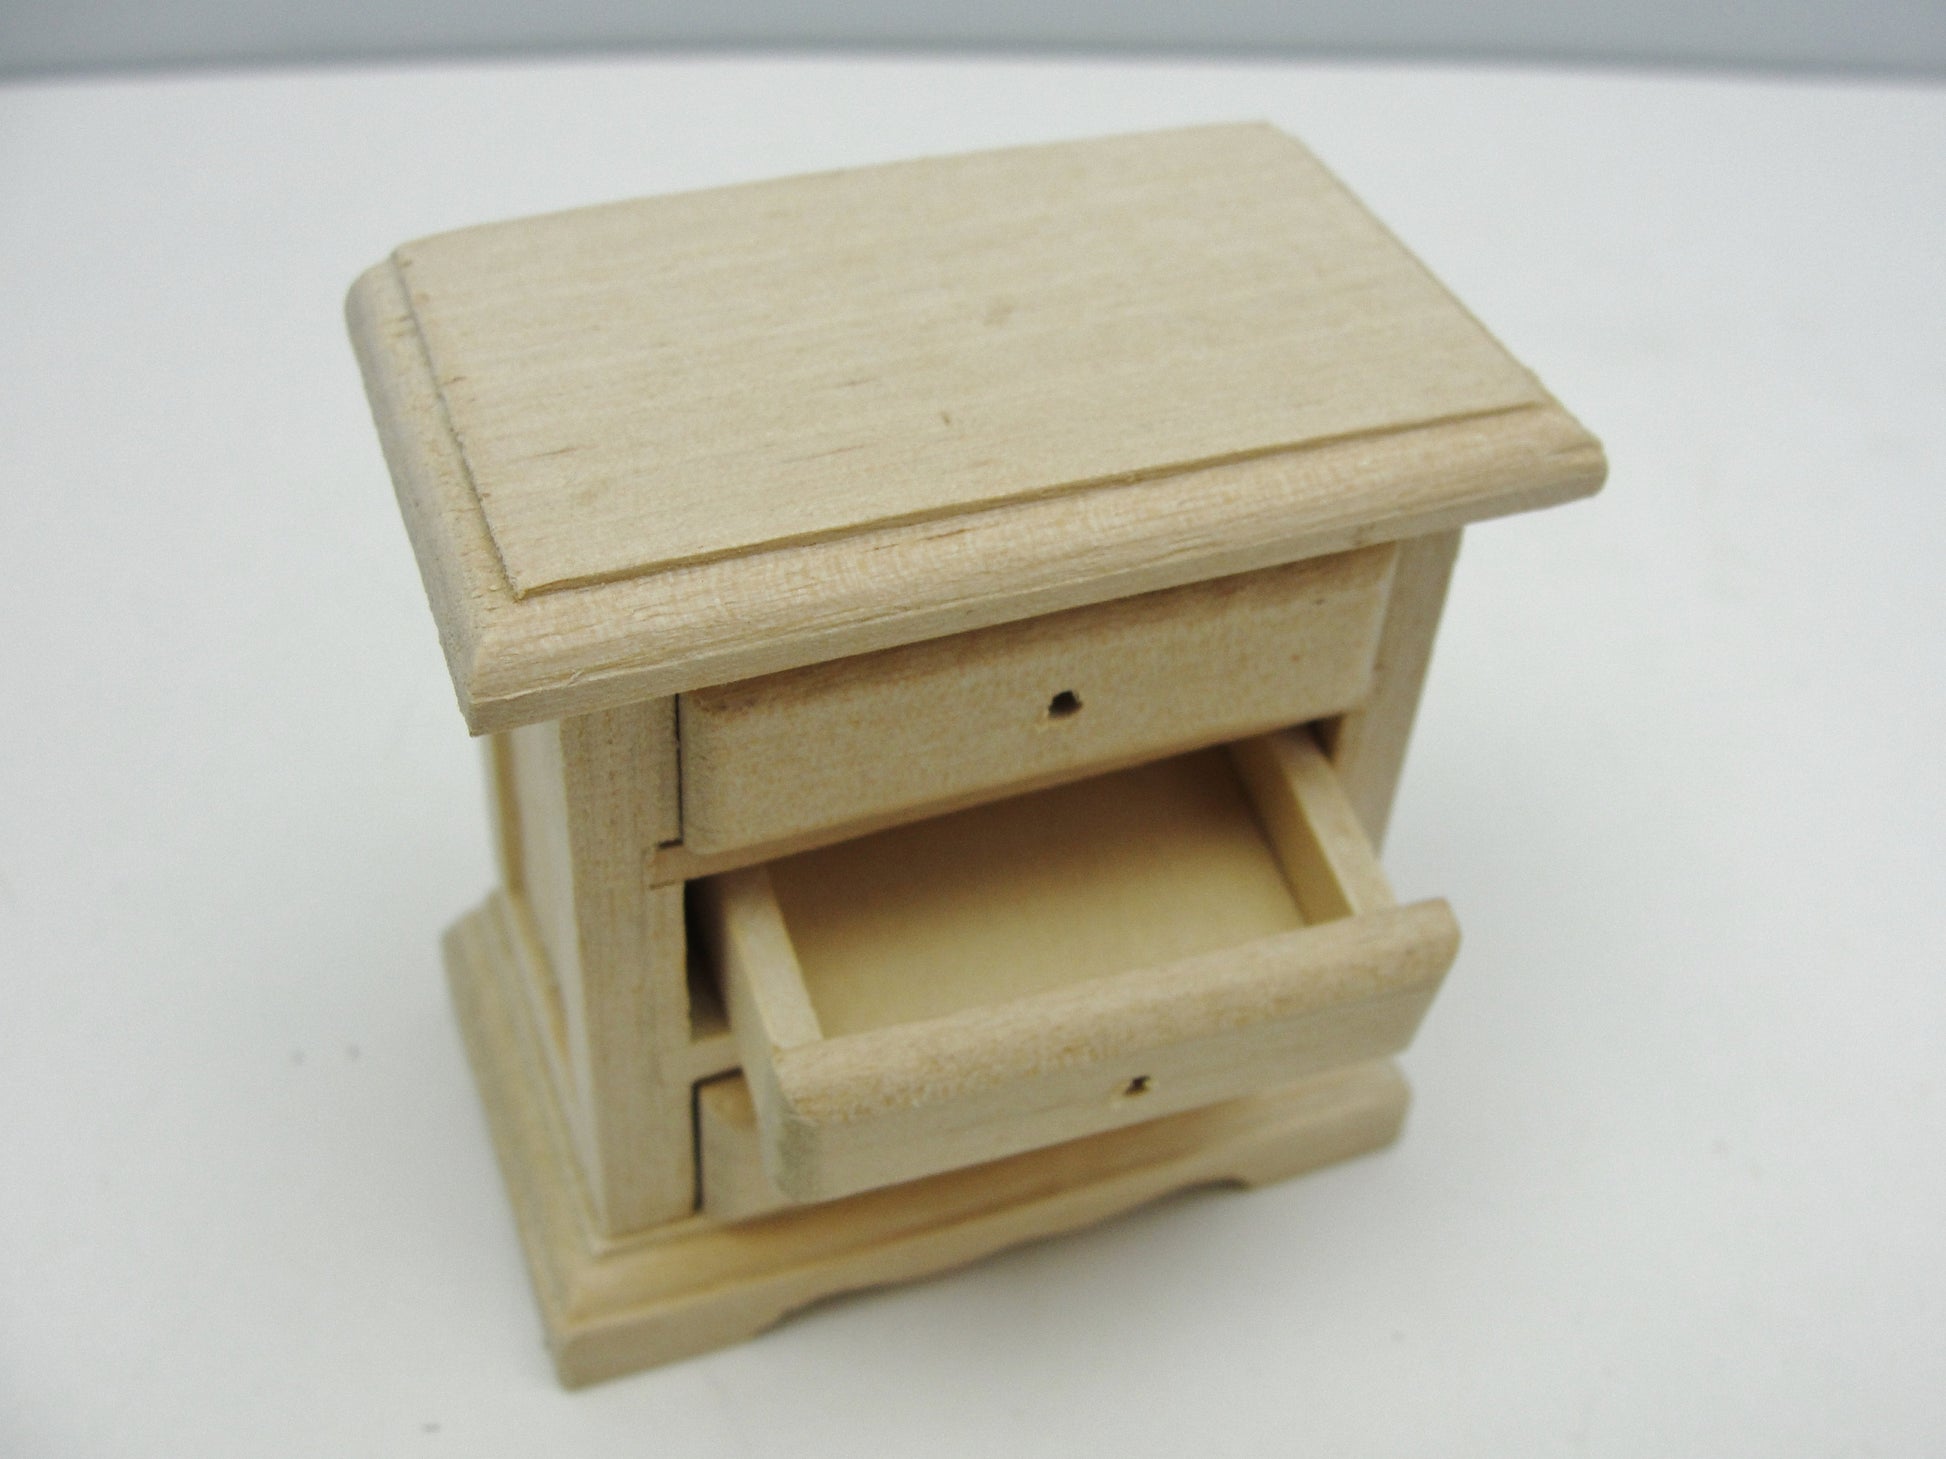 Dollhouse furniture miniature bedside nightstand or side table kit - Miniatures - Craft Supply House